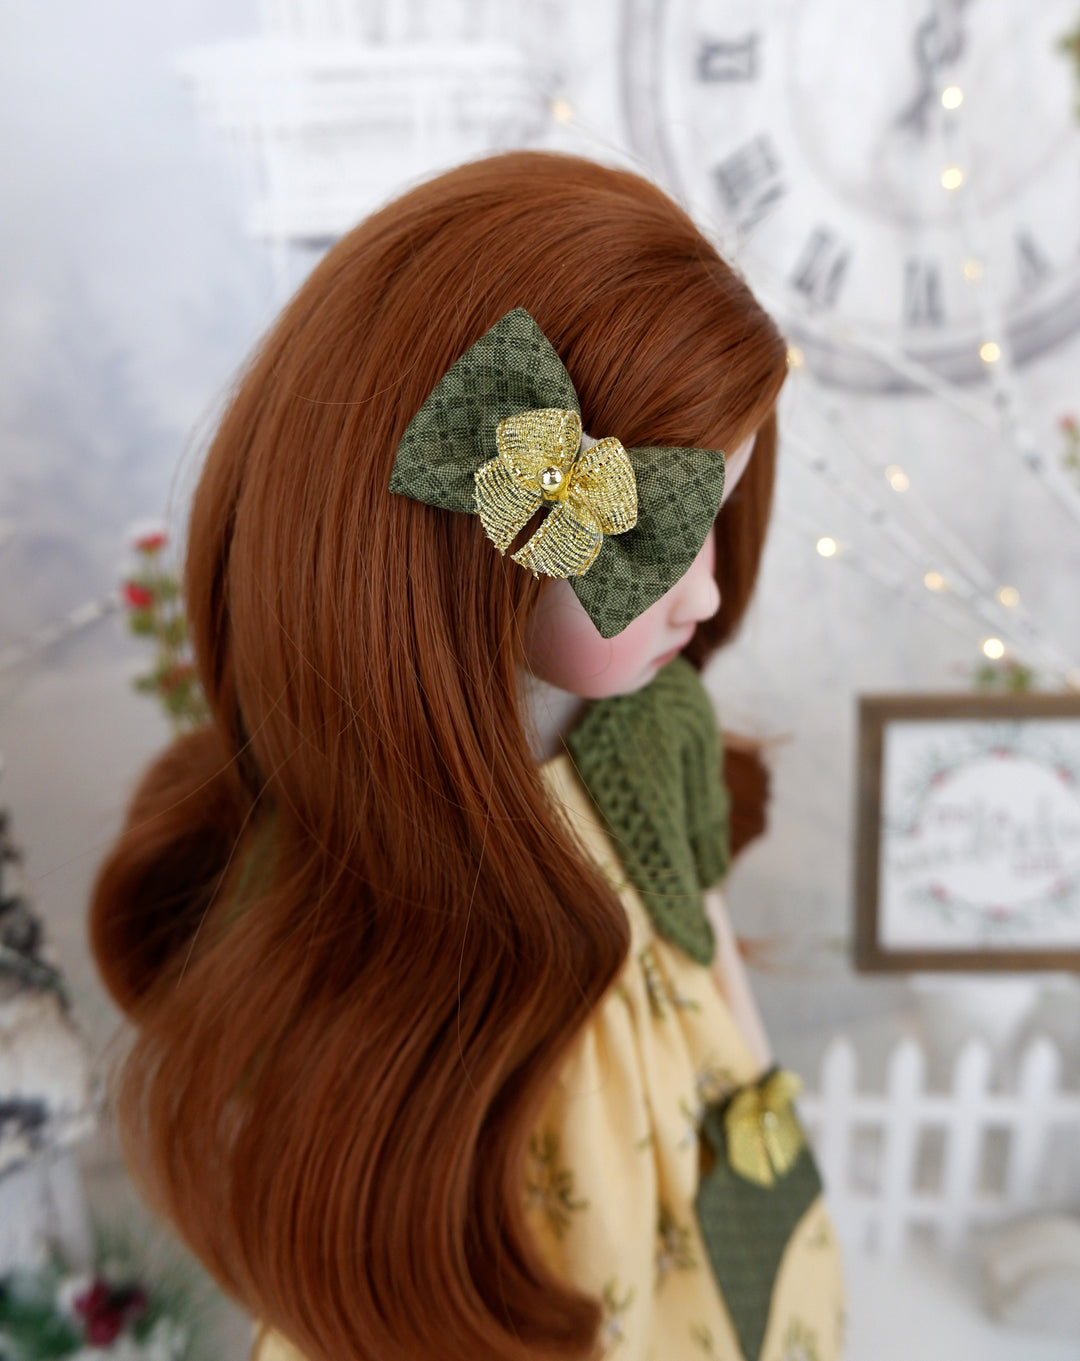 Mistletoe Kisses - dress with sweater & boots for Ruby Red Fashion Friends doll